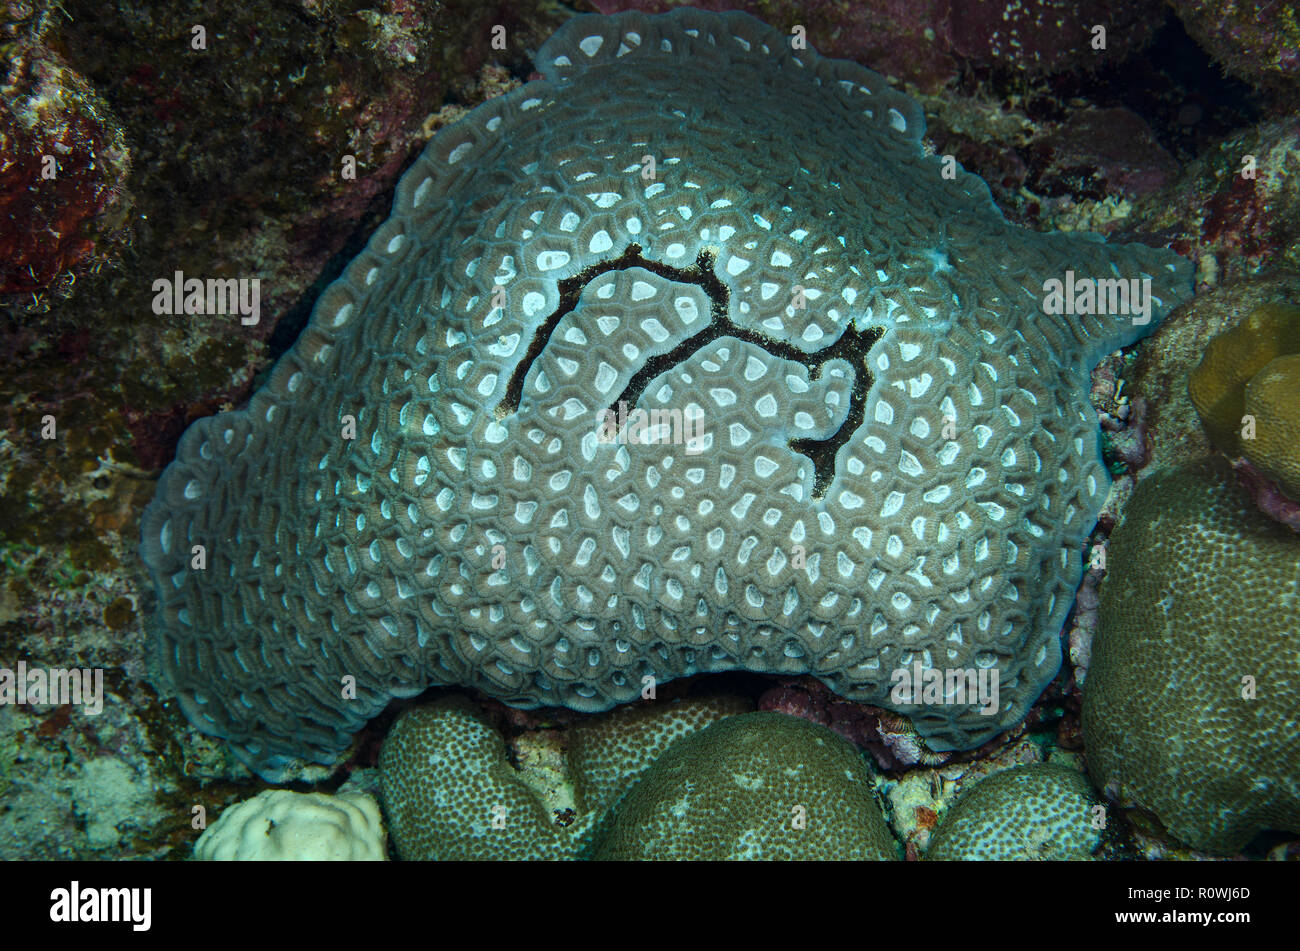 Damaged Brain coral, Favia favus, underwater in coral reef, Hamata, Red sea, Egypt Stock Photo